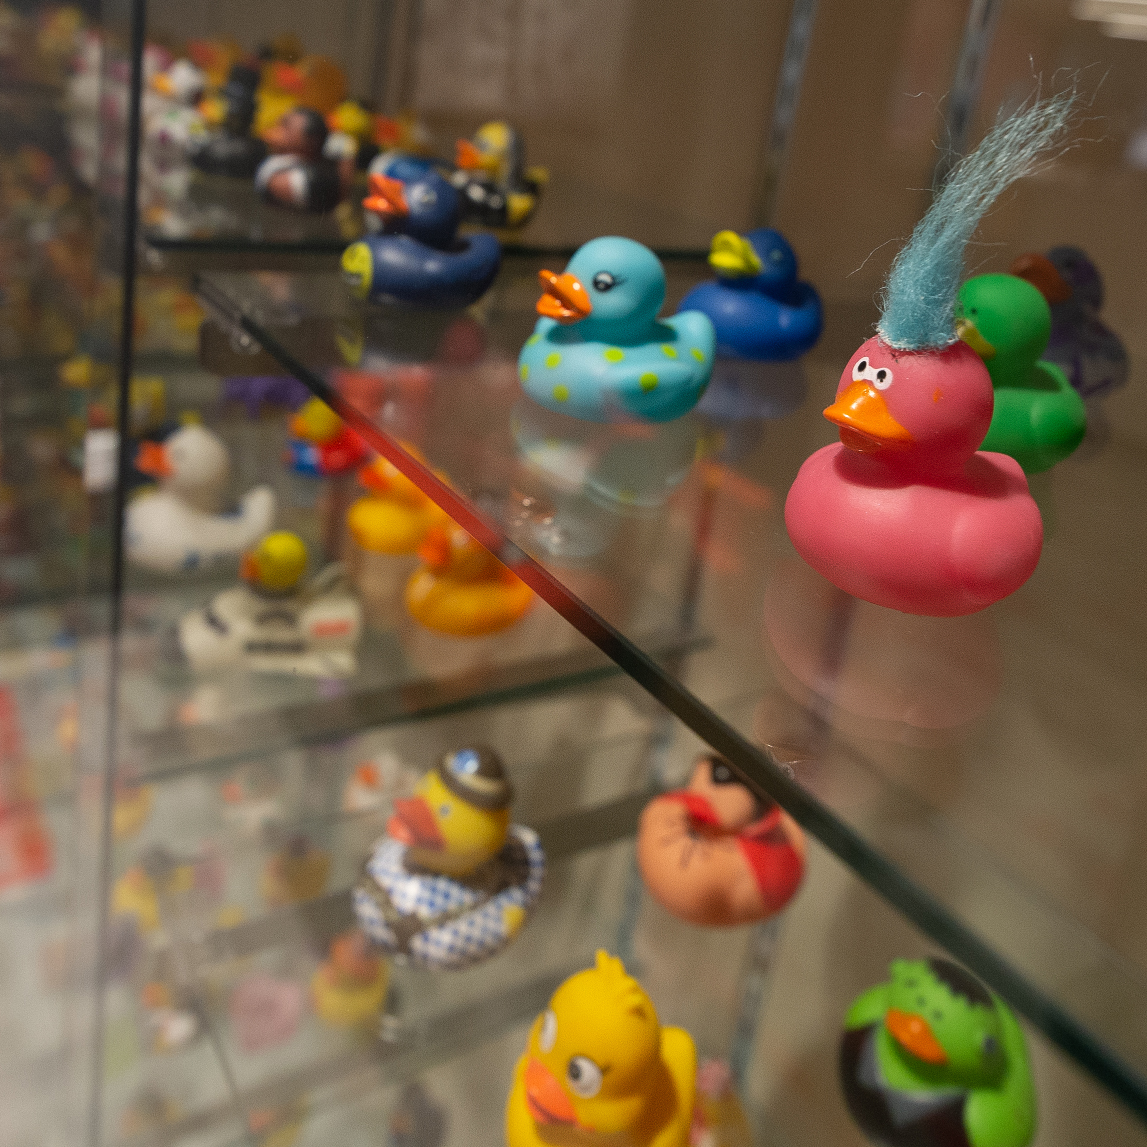 RUBBER DUCKS - International Bowling Museum & Hall of Fame